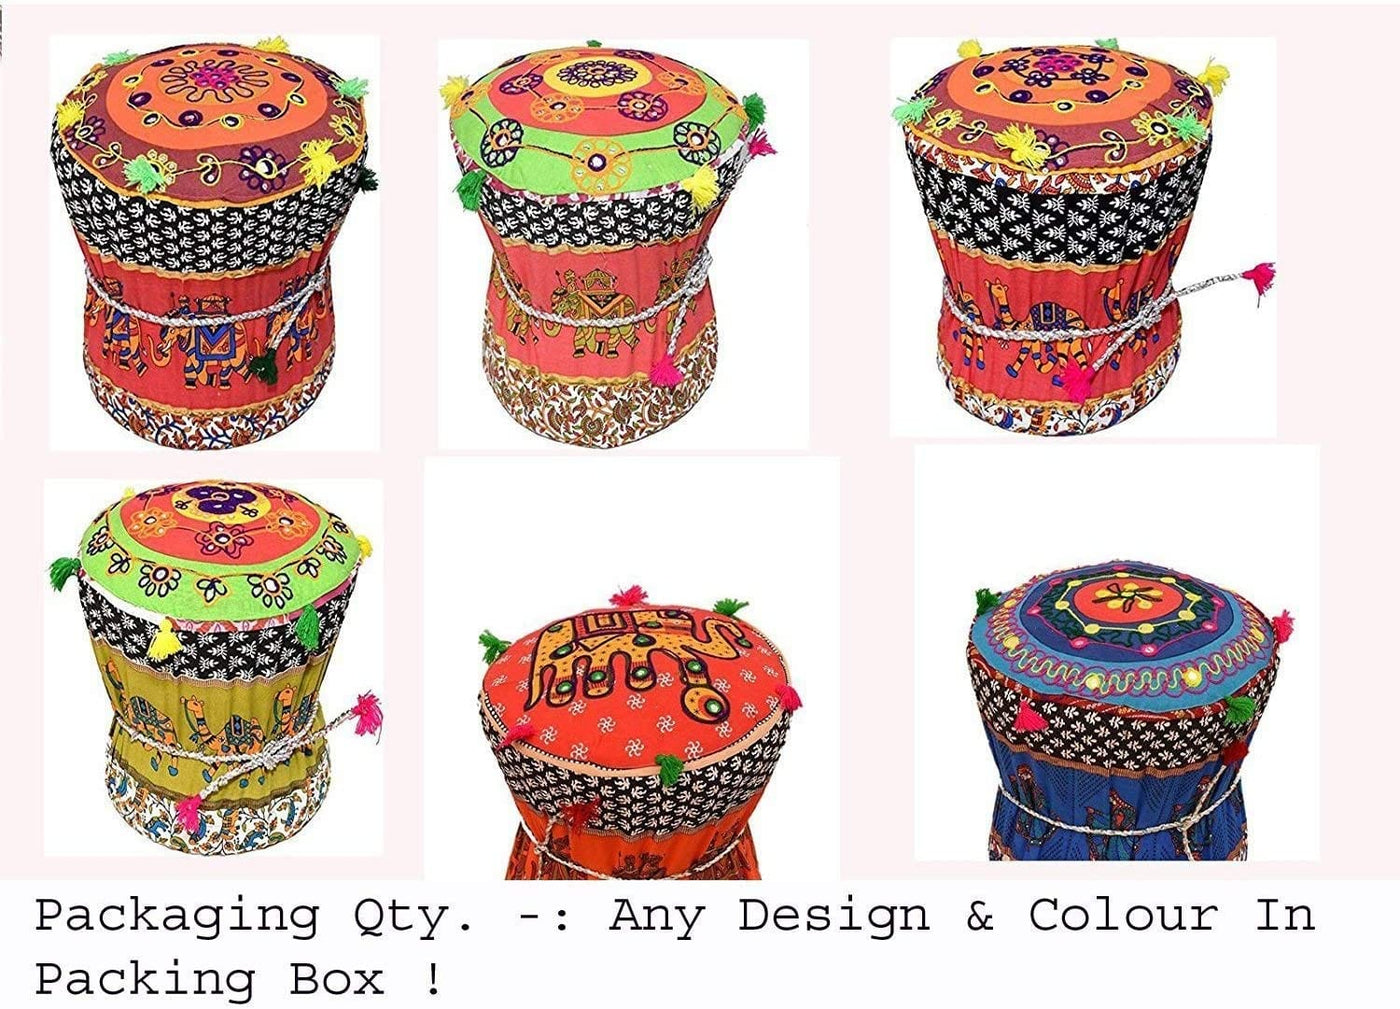 Lamansh rajasthani mudda for event decoration Assorted colors / Pack of 15 Wholesale Pack of 15 Rajasthani Mudda Stools at Rs 700 each (Free shipping included)  Event Decoration / Perfect for Ethnic Indian events & backdrop / Handmade Patchwork Cotton Single Mudda/Ottoman/Pouffe